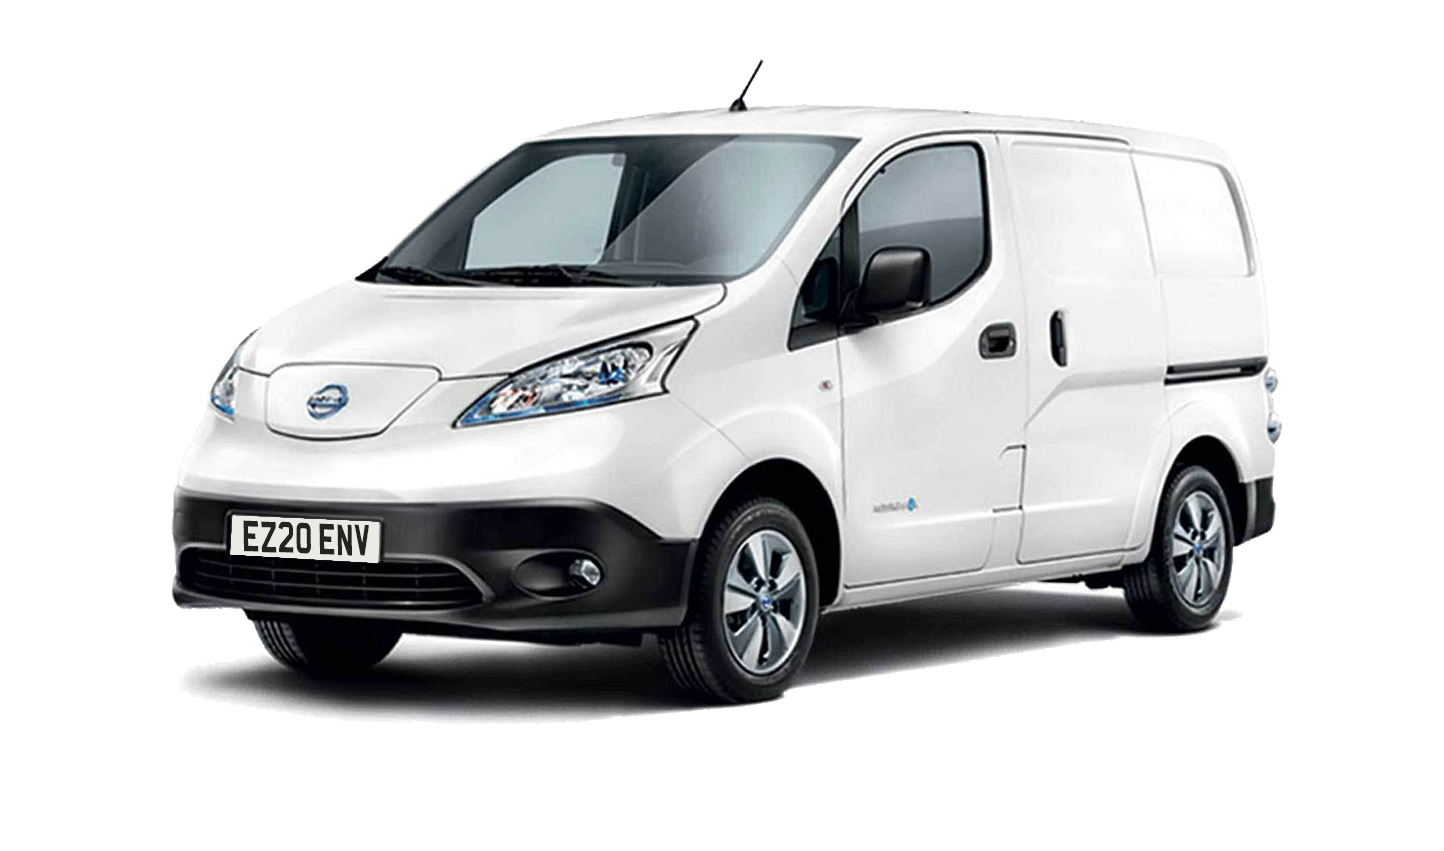 Used Nissan e-NV200 Review and Buyers Guide